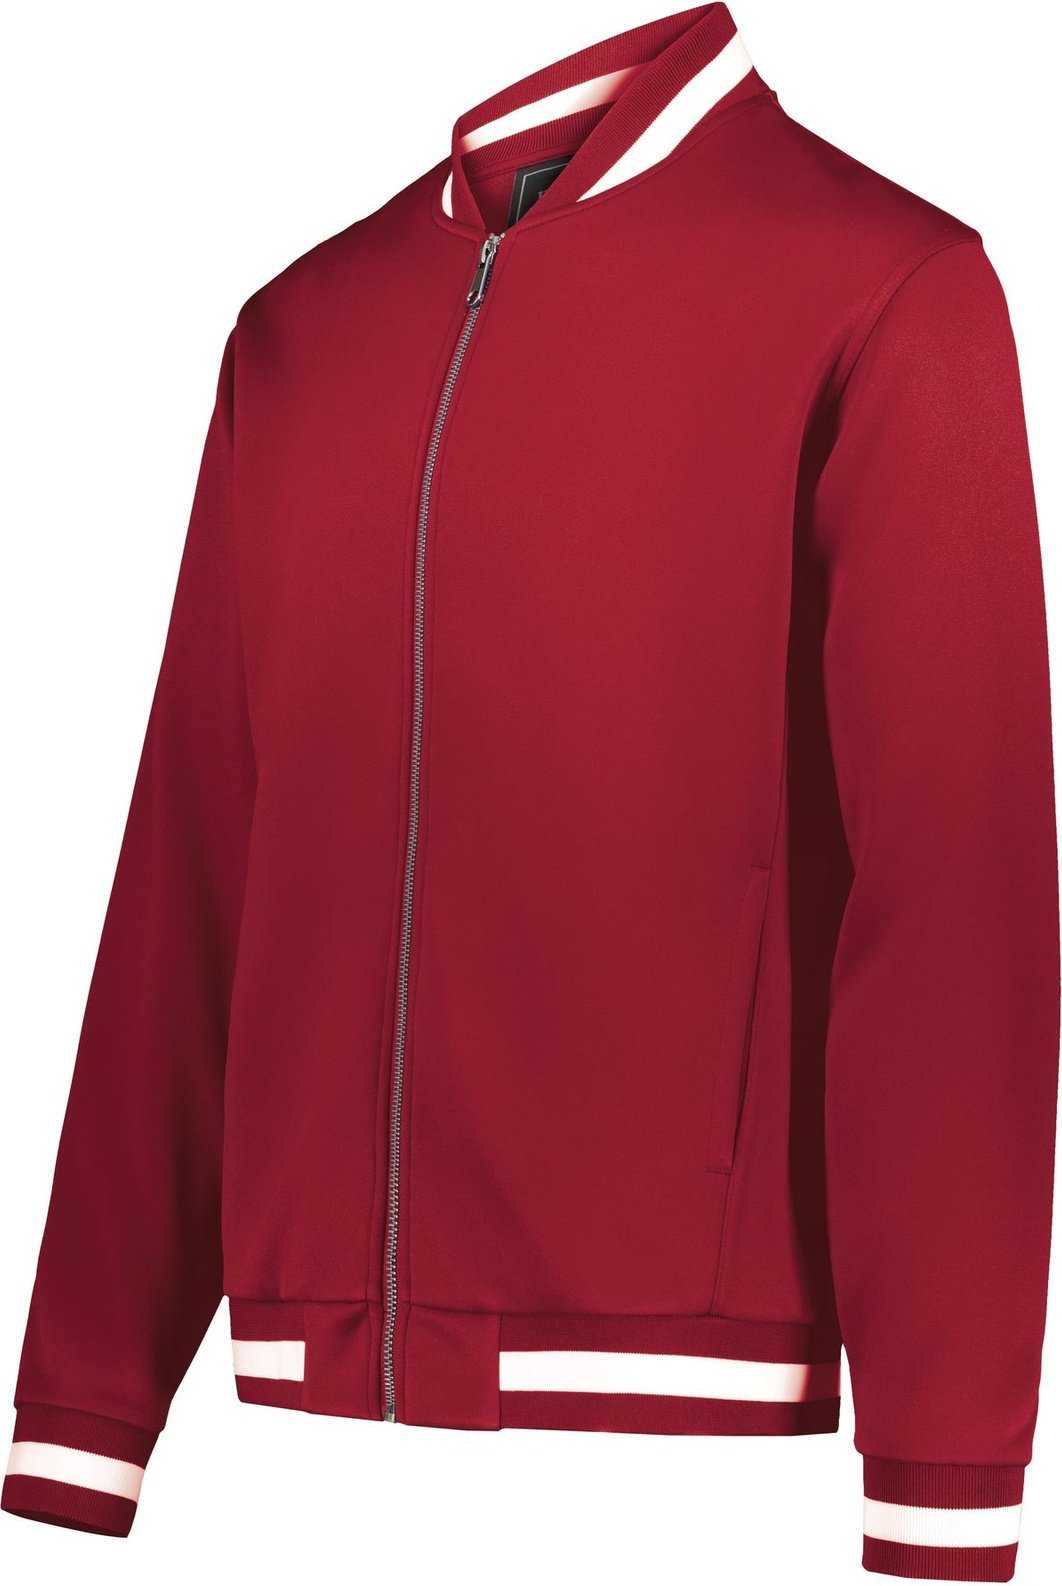 Holloway 223647 Youth V Street Full Zip Jacket - Scarlet White - HIT a Double